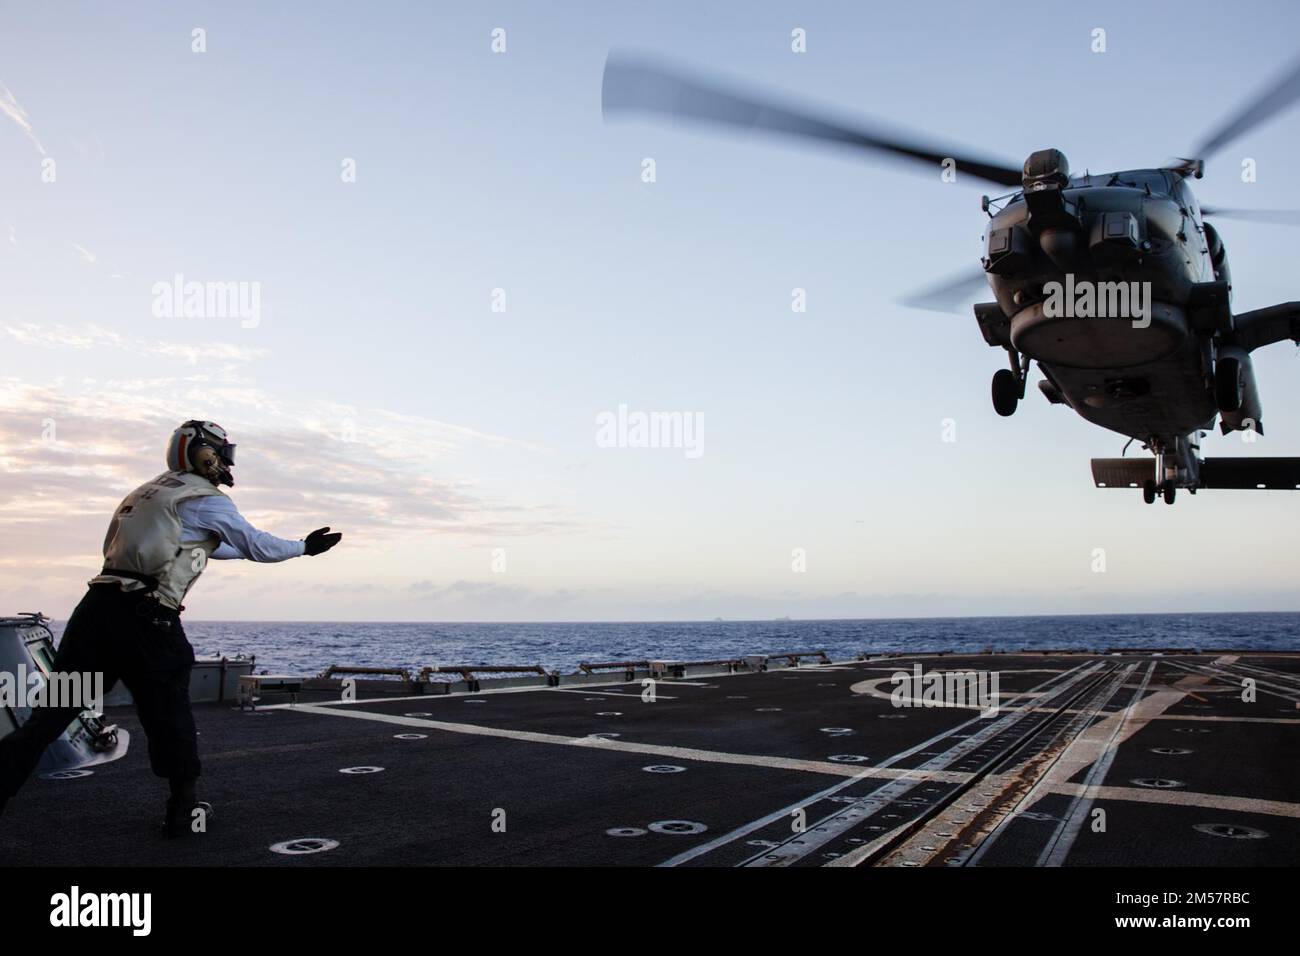 221222-N-YV347-1145 PACIFIC OCEAN (Dec. 22, 2022) U.S. Navy Boatswain’s Mate 2nd Class Joel Dominic Lazo, from San Jose, Calif., uses hand signals to guide the pilot of an MH-60R Sea Hawk helicopter assigned to the 'Battlecats' of Helicopter Maritime Strike Squadron (HSM) 73 on the flight deck of the Ticonderoga-class guided-missile cruiser USS Bunker Hill (CG 52). Bunker Hill, part of the Nimitz Carrier Strike Group, is currently underway in 7th Fleet conducting routine operations. 7th Fleet is the U.S. Navy ‘s largest forward-deployed numbered fleet, and routinely interacts and operates with Stock Photo